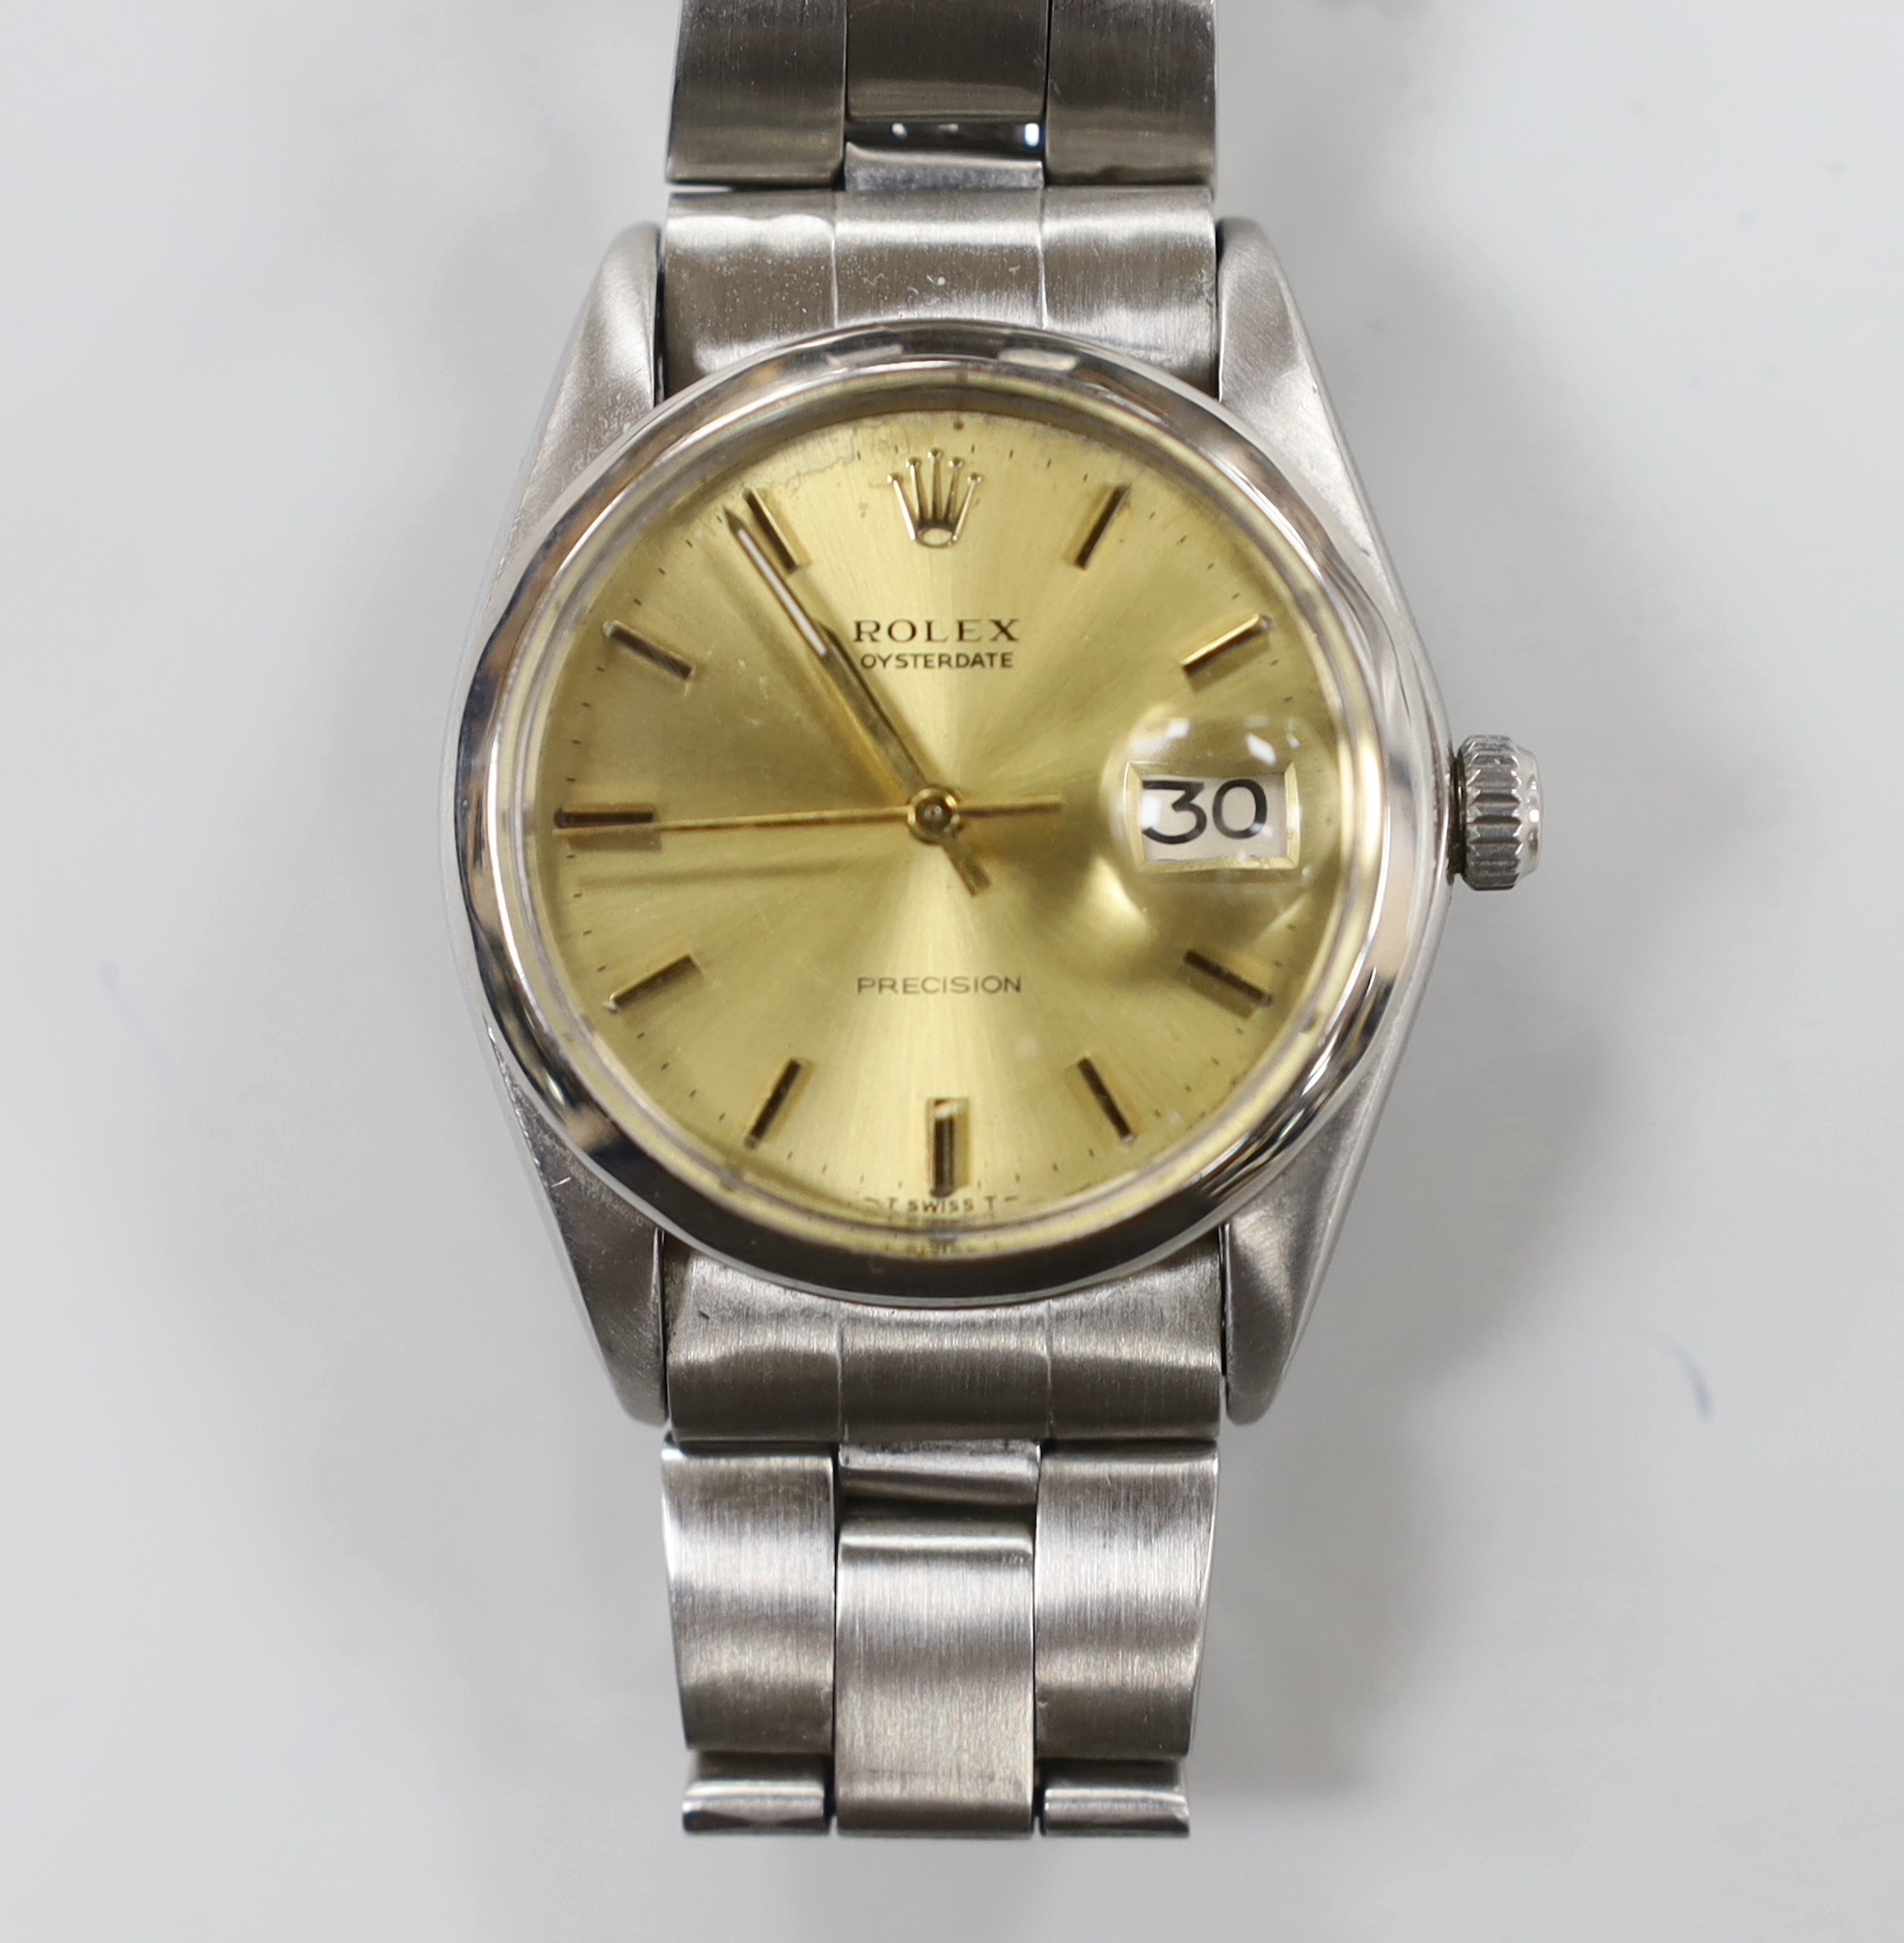 A gentleman's 1970's stainless steel Rolex Oysterdate precision wrist watch, with yellow dial, on a stainless steel Rolex bracelet, model number 6694 serial no. 3737889, no box or papers, case diameter 35mm.